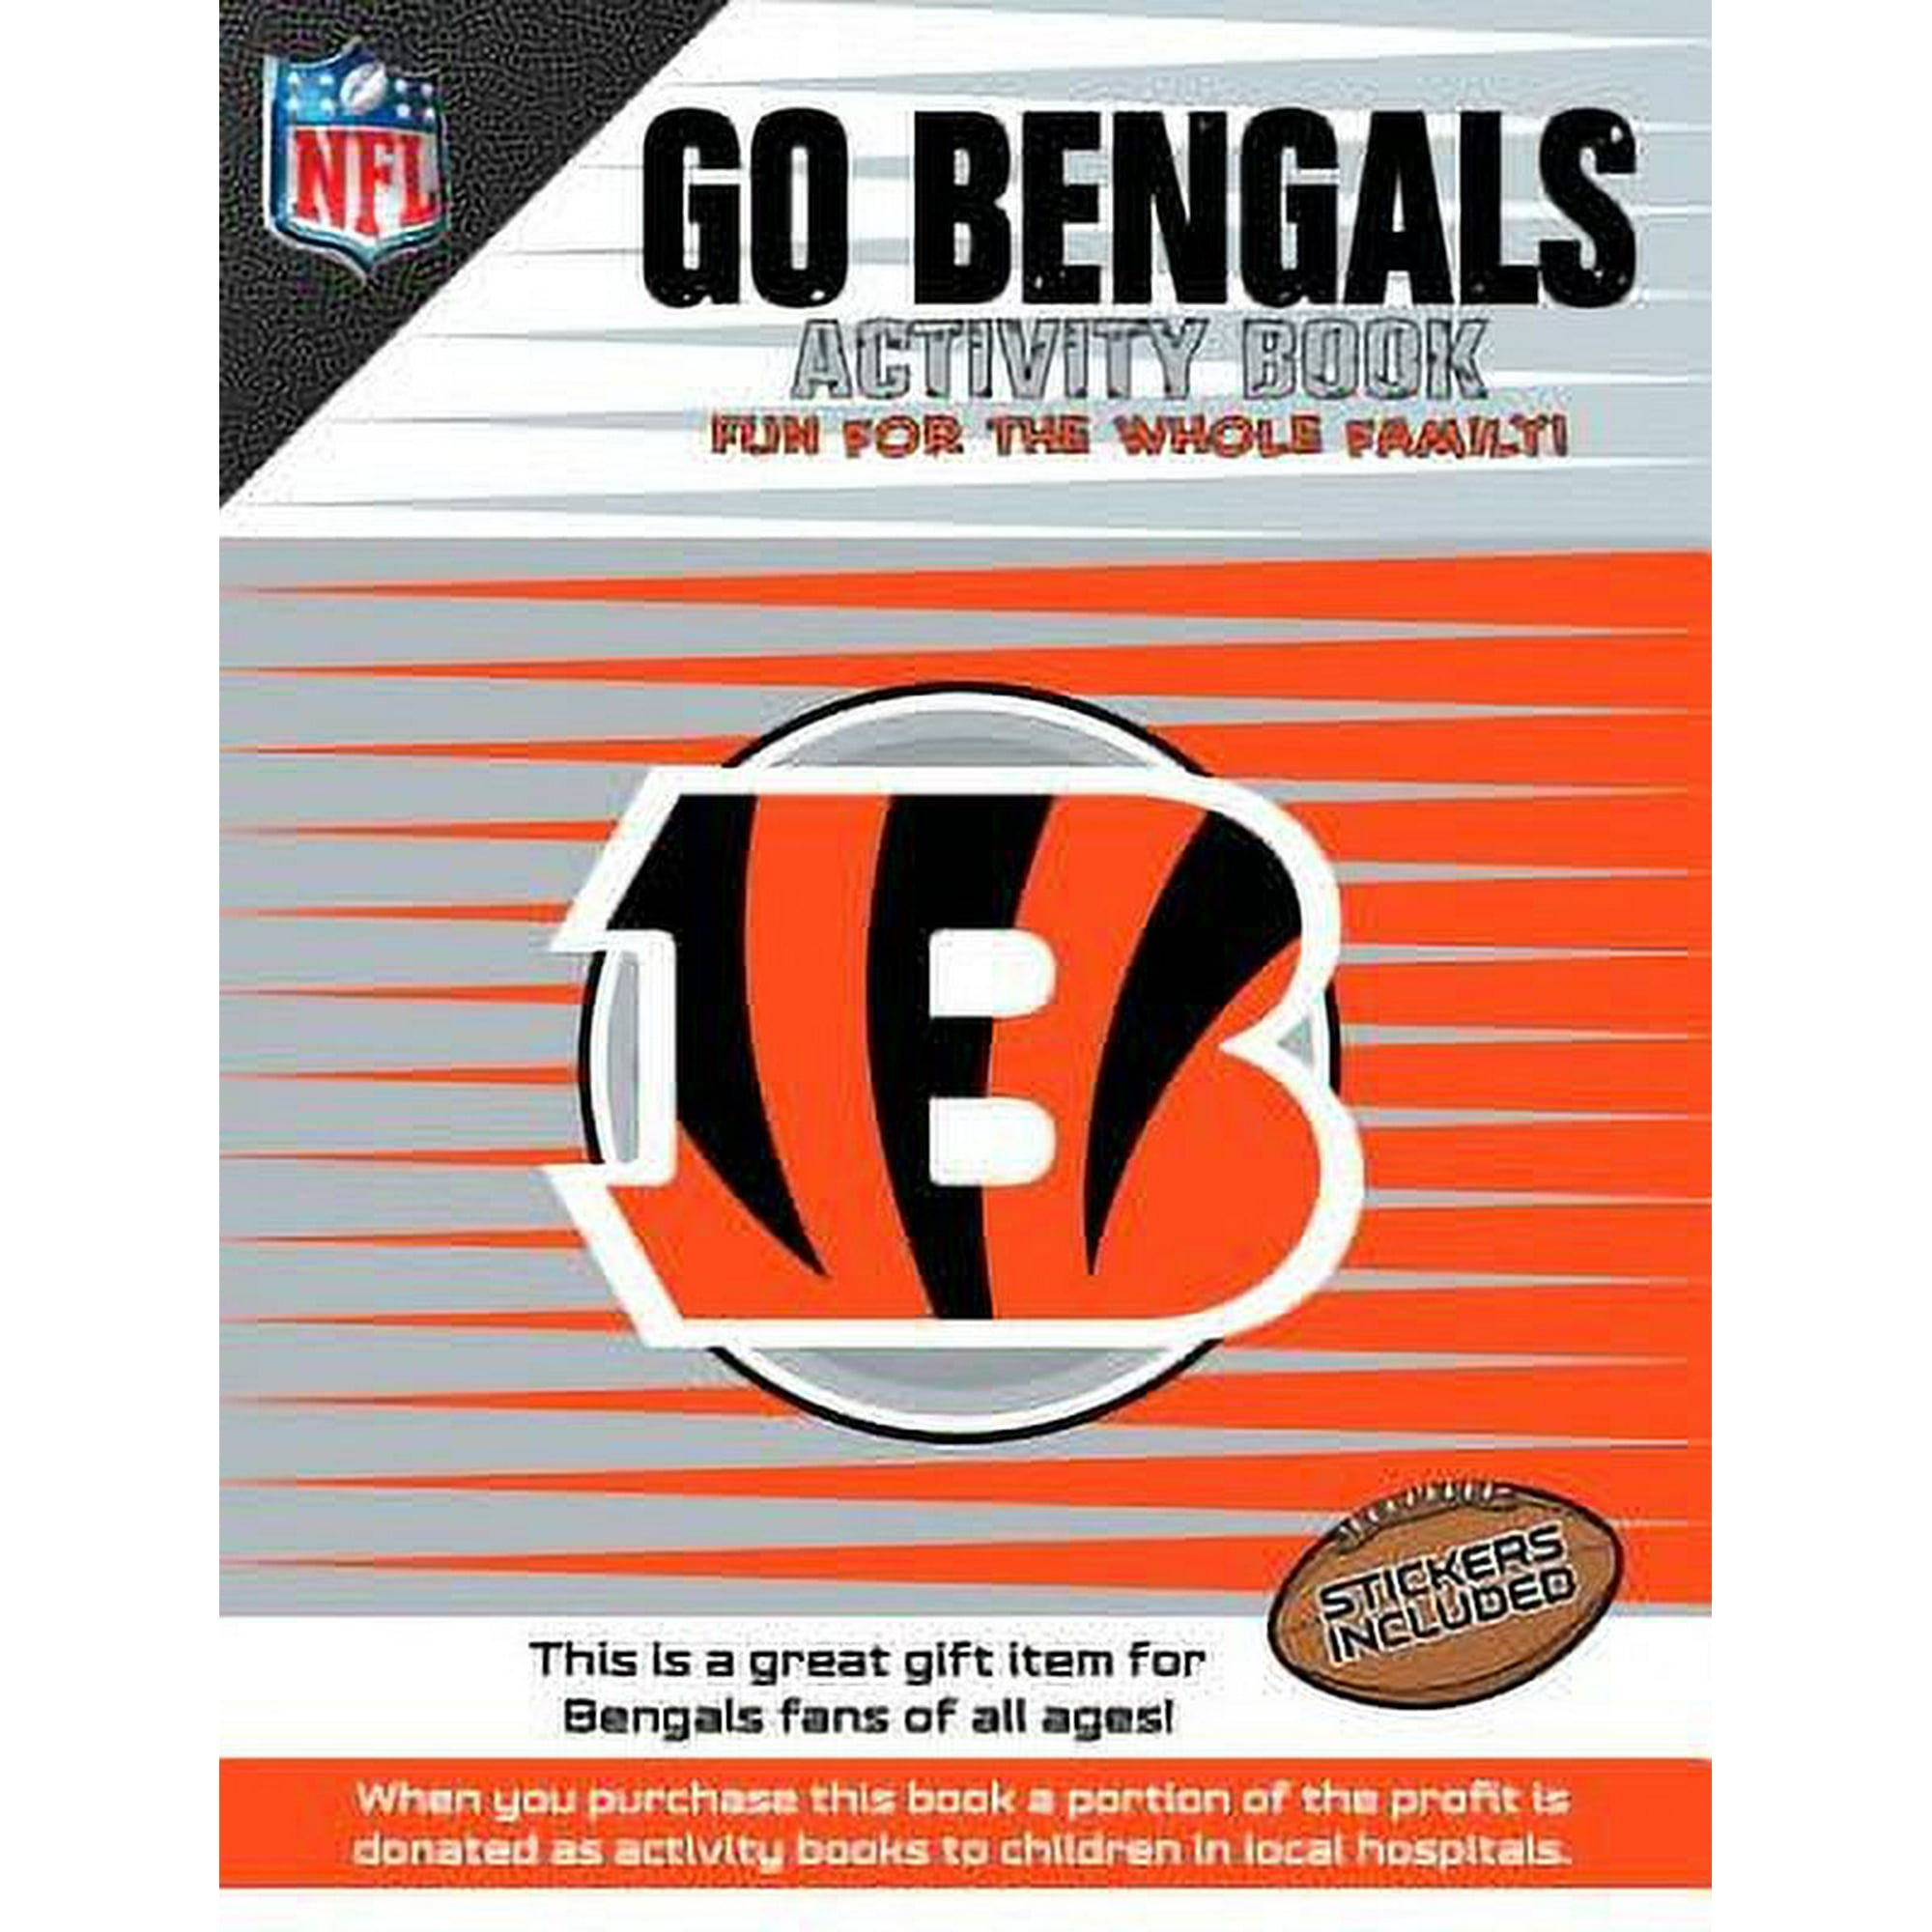 In the Sports Zone - The Go Bengals Activity Book